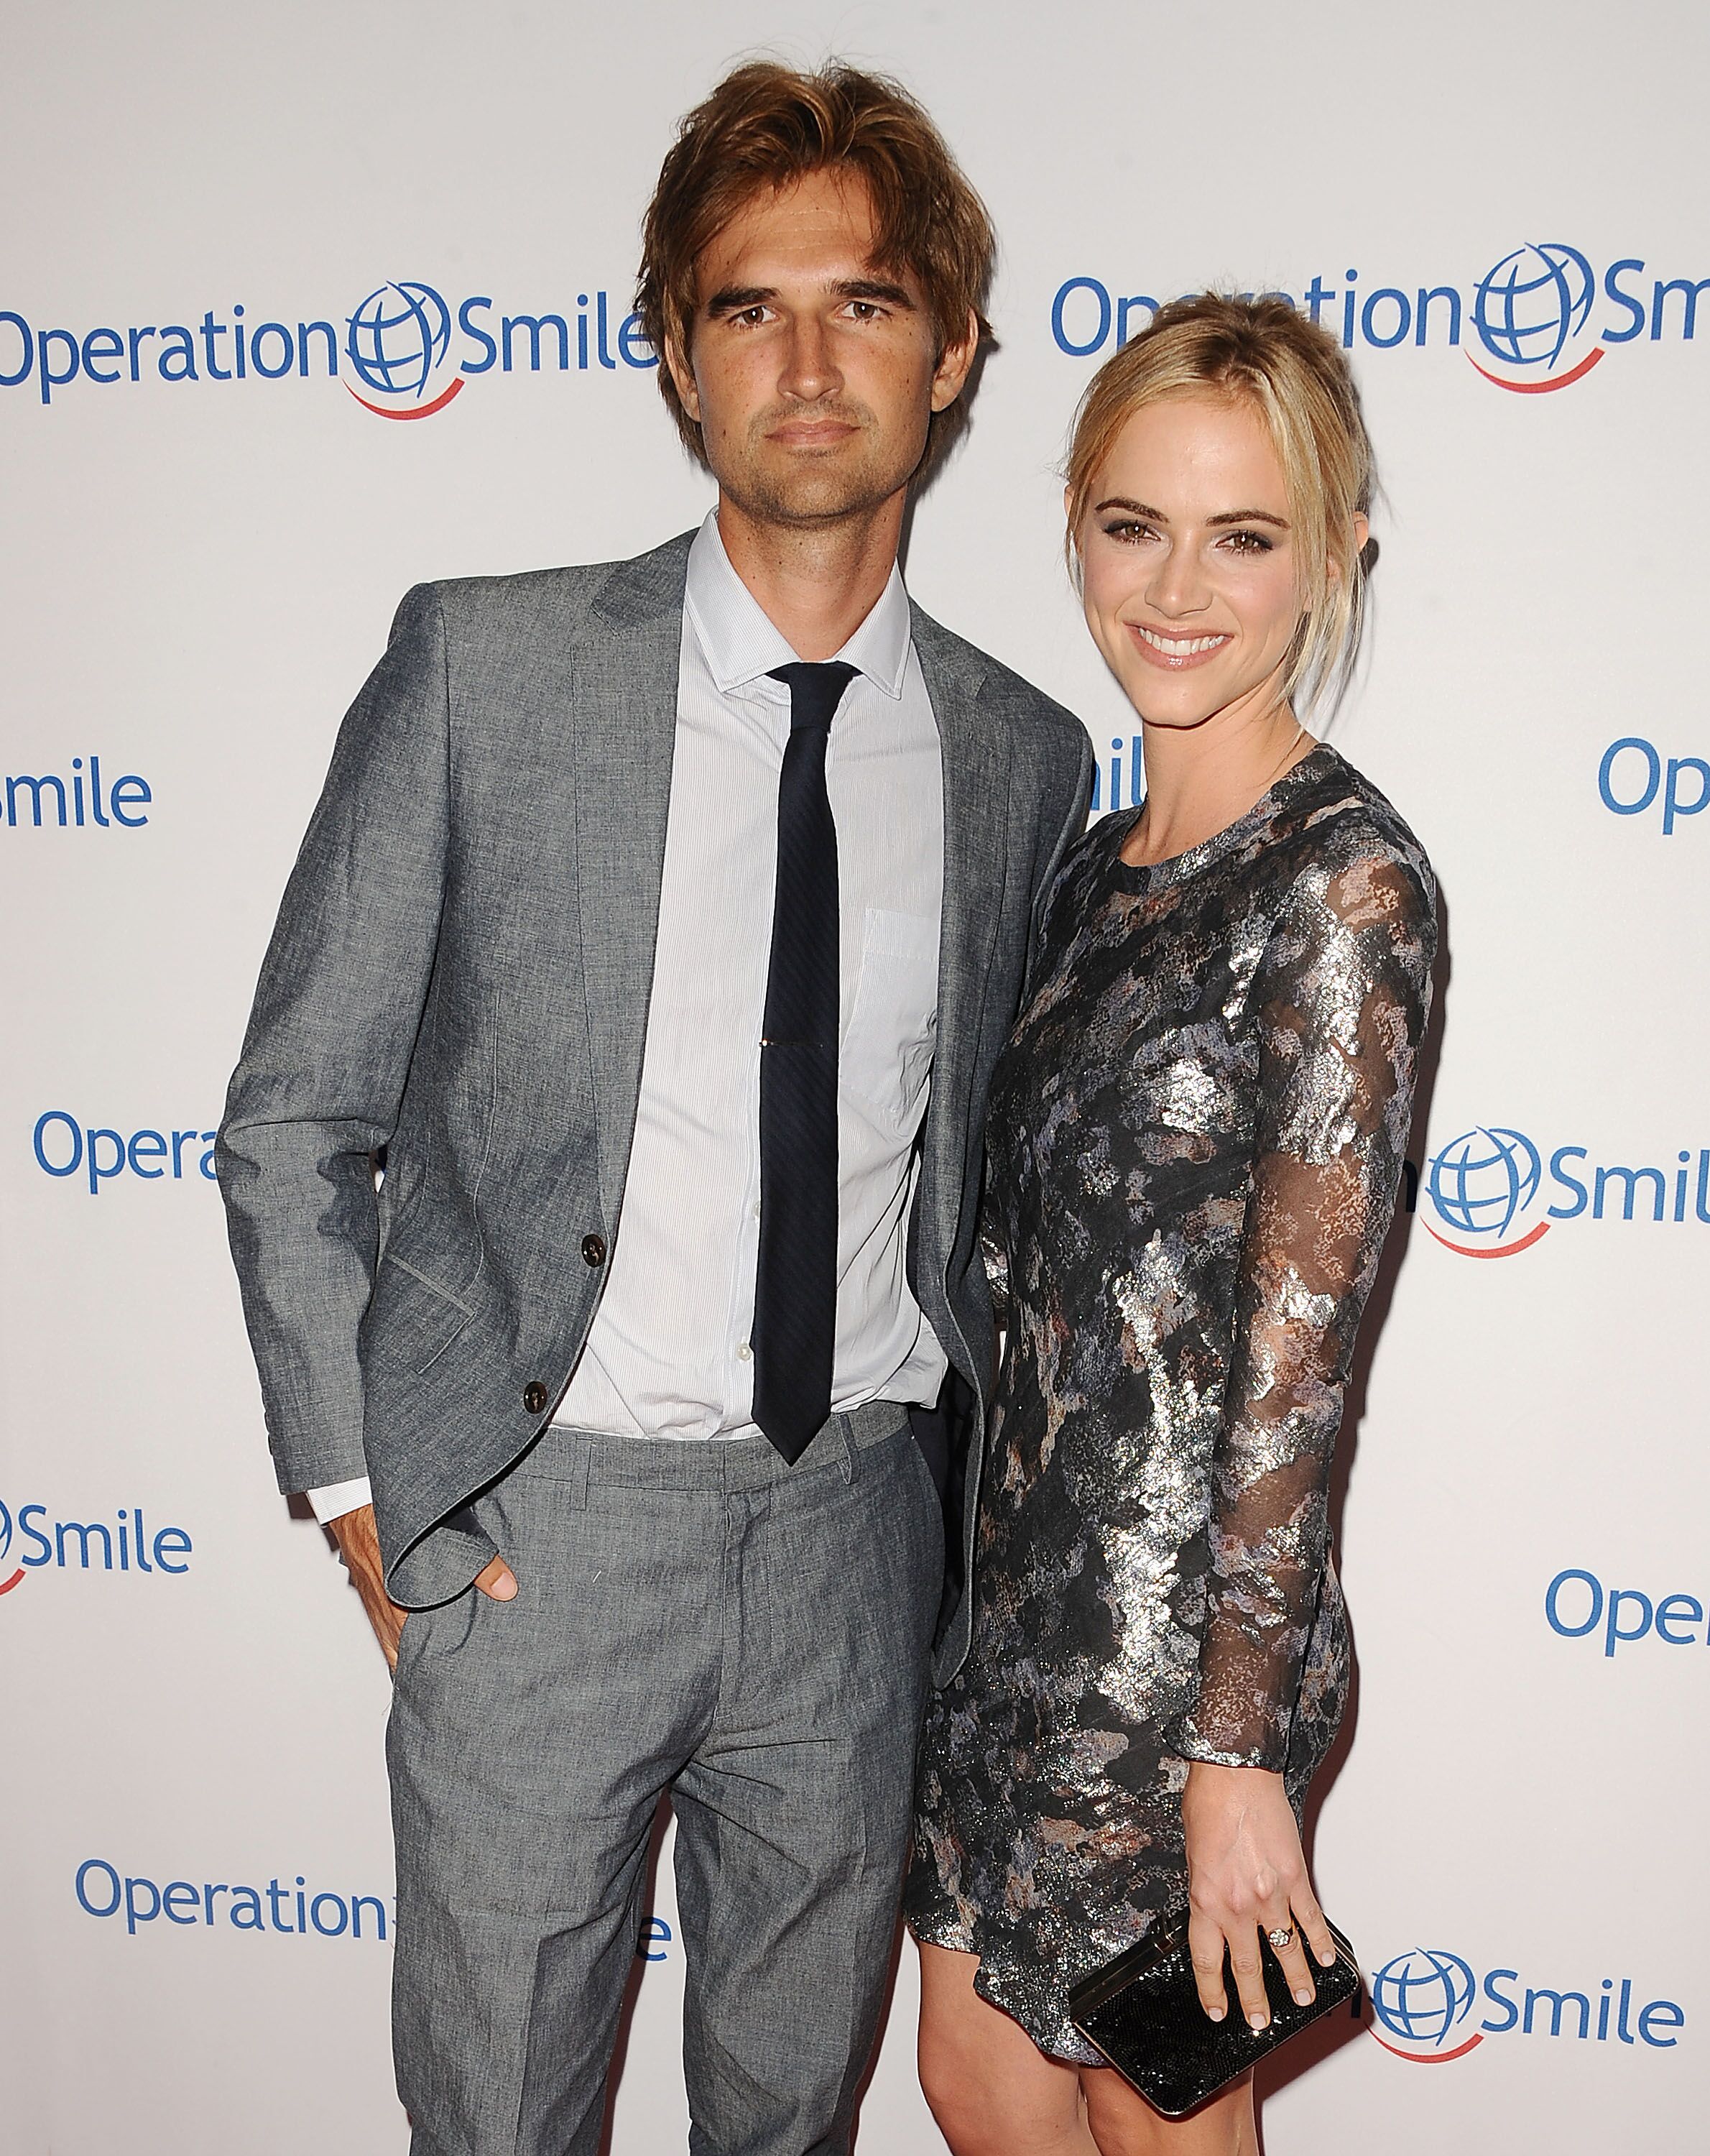 Emily Wickersham and Blake Hanley attend the 2014 Operation Smile gala at the Beverly Wilshire Four Seasons Hotel on September 19, 2014 in Beverly Hills, California. | Source: Getty Images